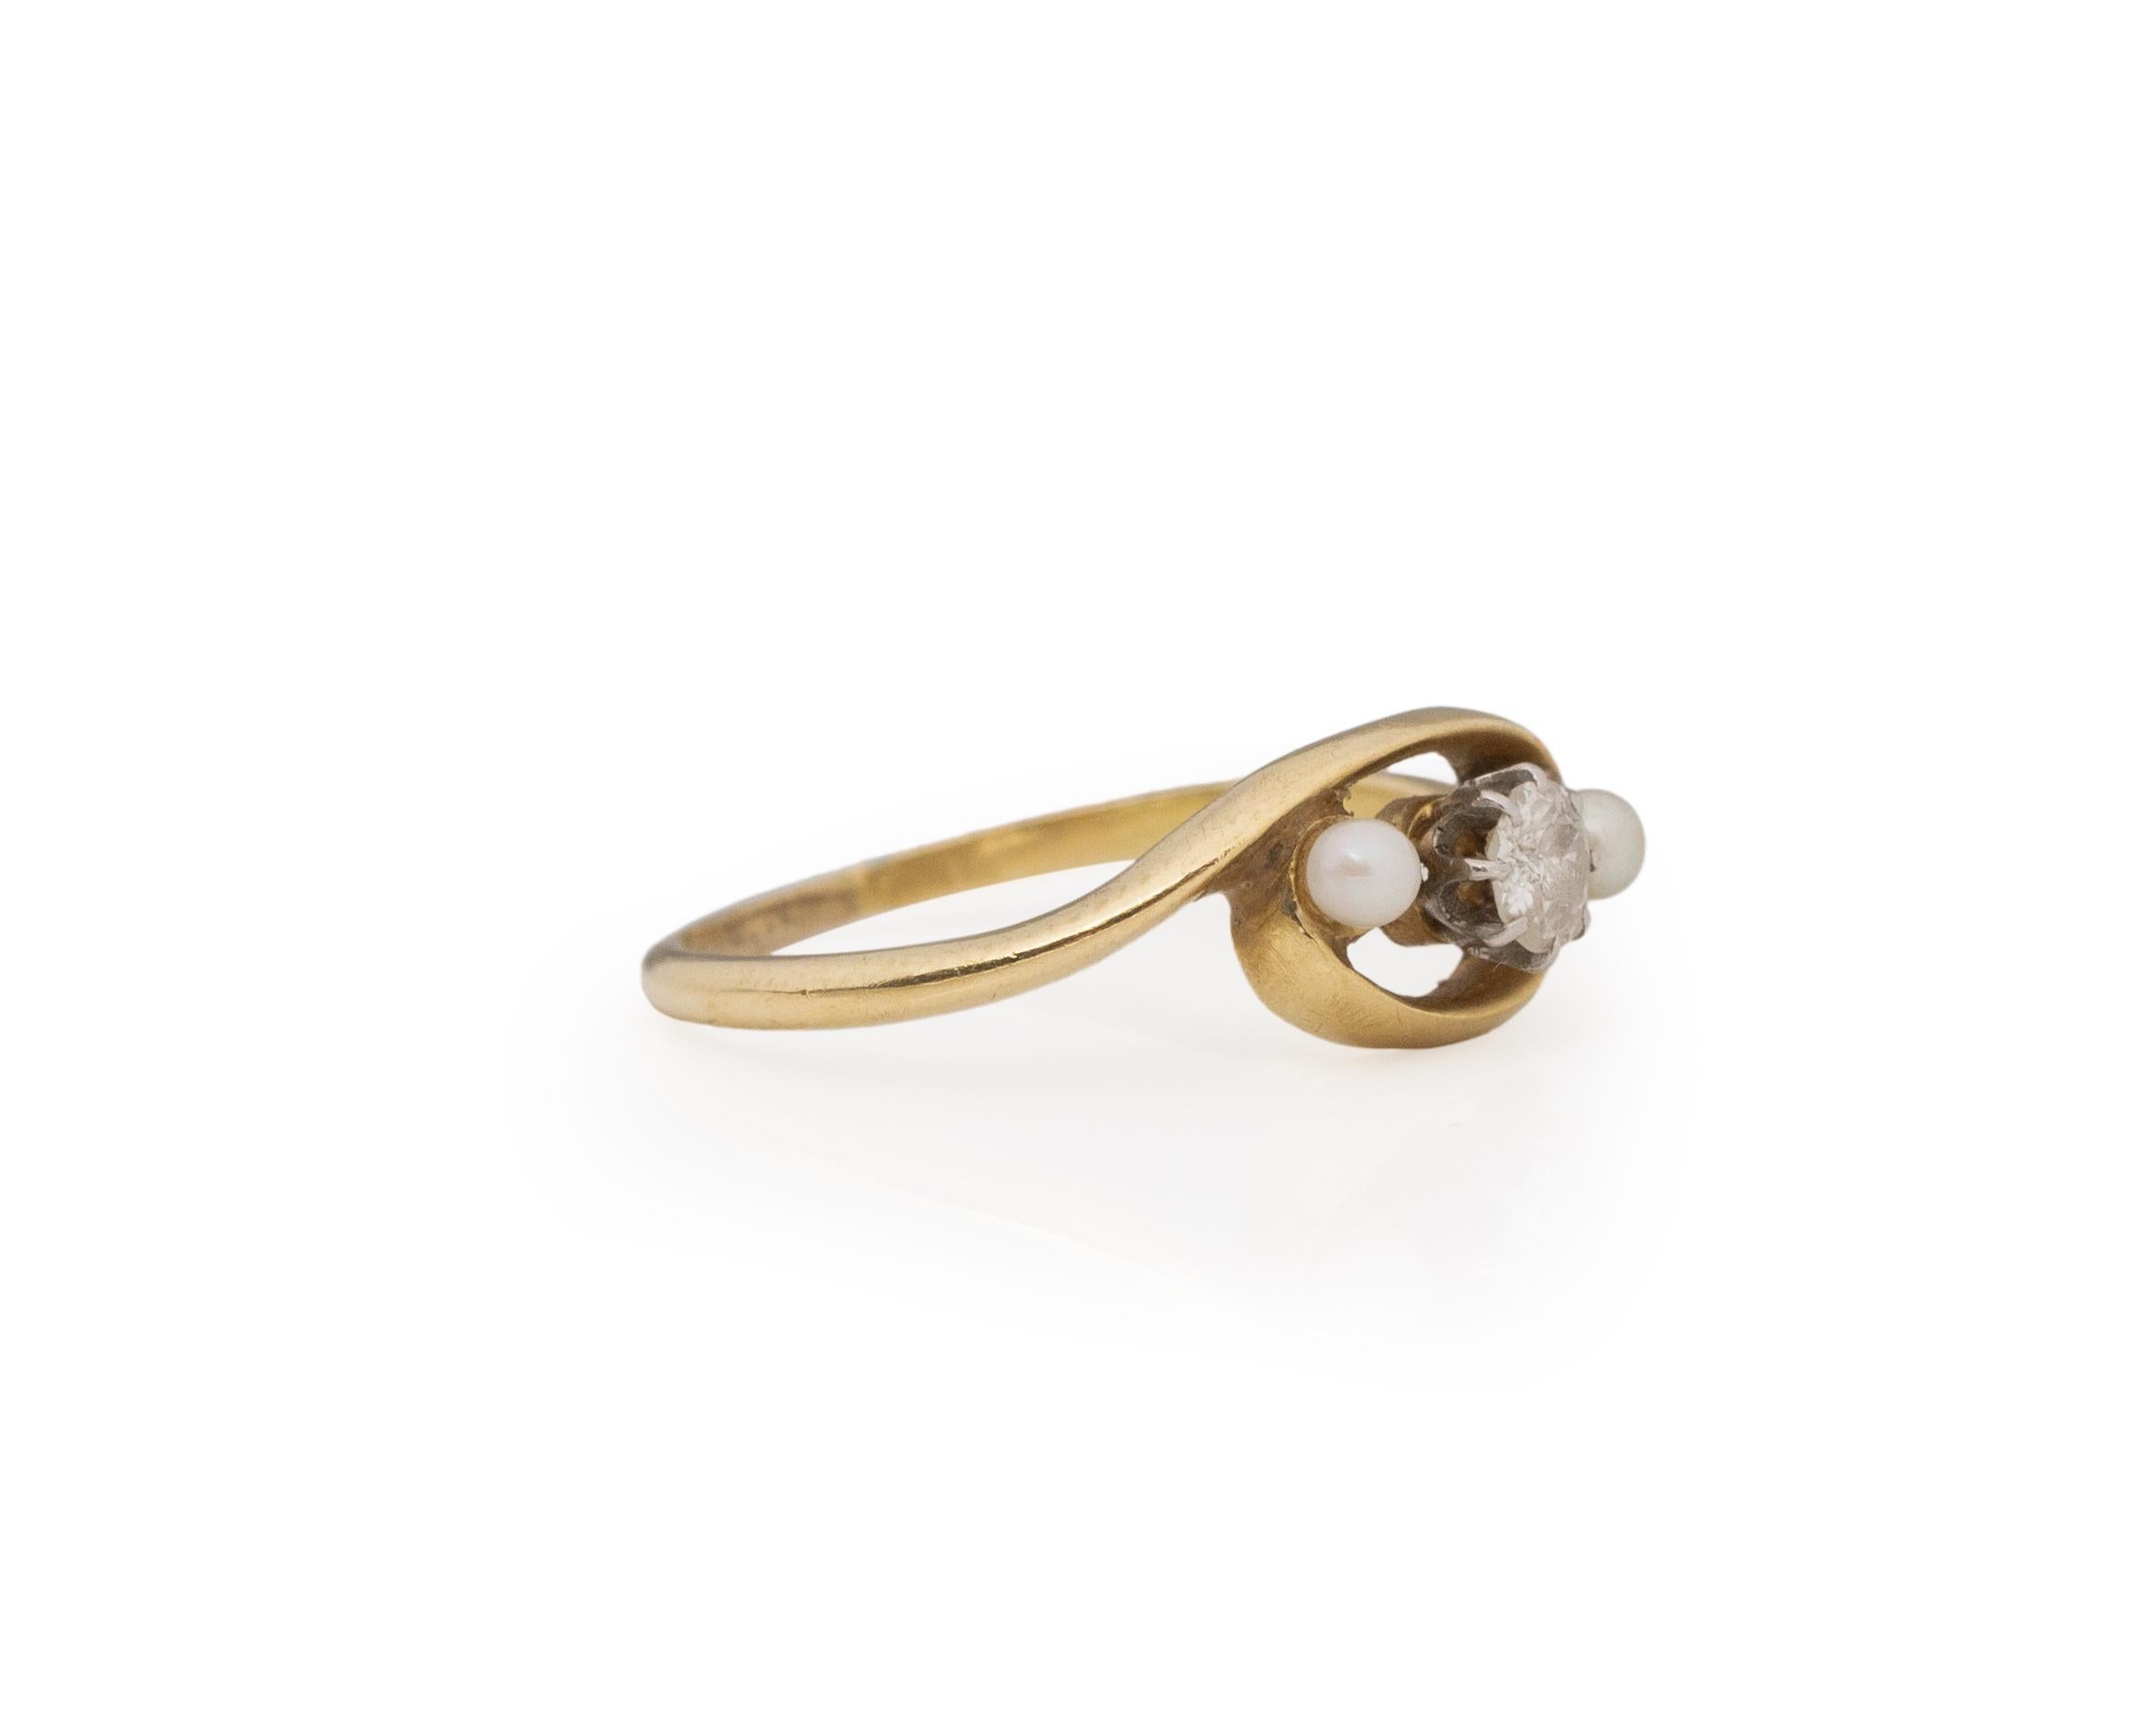 Ring Size: 7
Metal Type: 14k Yellow Gold [Hallmarked, and Tested]
Weight: 2.5 grams

Center Diamond Details:
Weight: .12ct
Cut: Old European brilliant
Color: J
Clarity: SI

Finger to Top of Stone Measurement: 5mm
Condition: Excellent